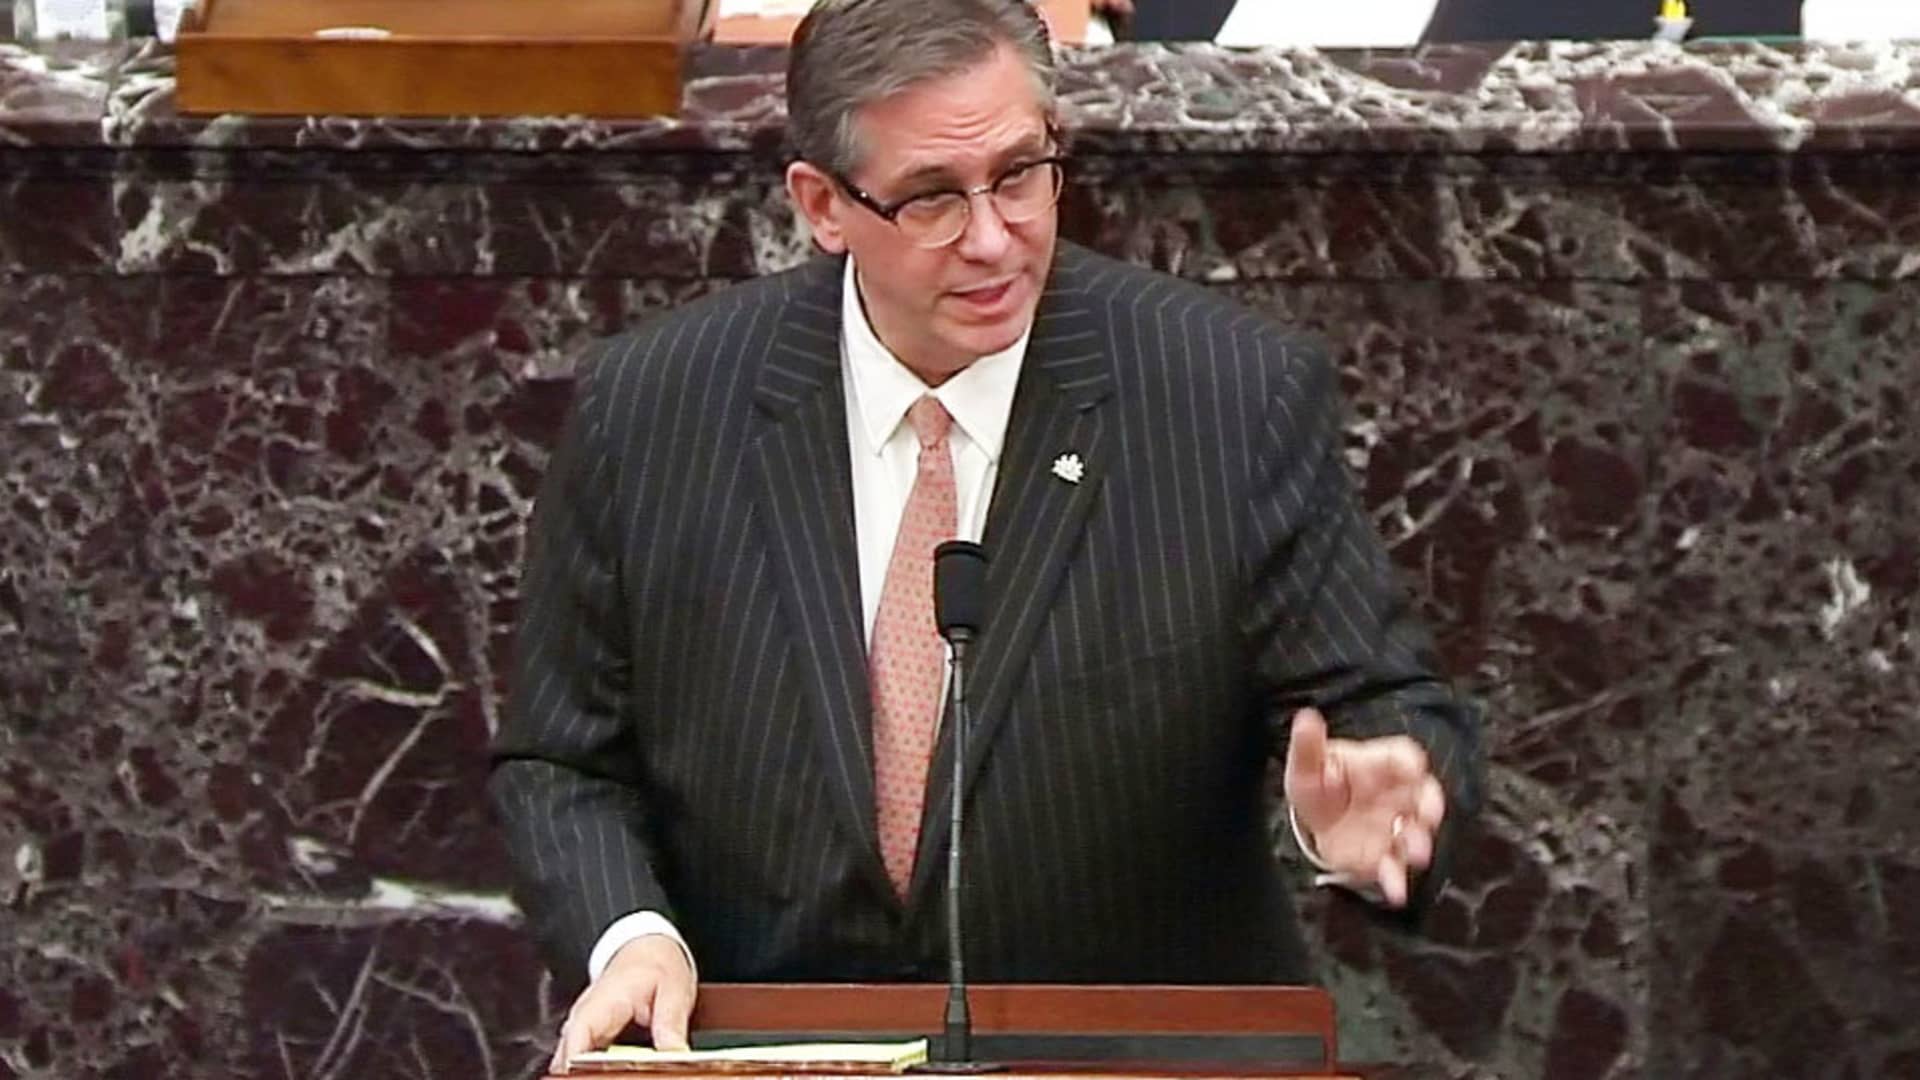 Attorney Bruce Castor, representing and defending former President Donald Trump, addresses the U.S. Senate as it begins the second impeachment trial of former president, on charges of inciting the deadly attack on the U.S. Capitol, on the floor of the Senate chamber on Capitol Hill in Washington, February 9, 2021.